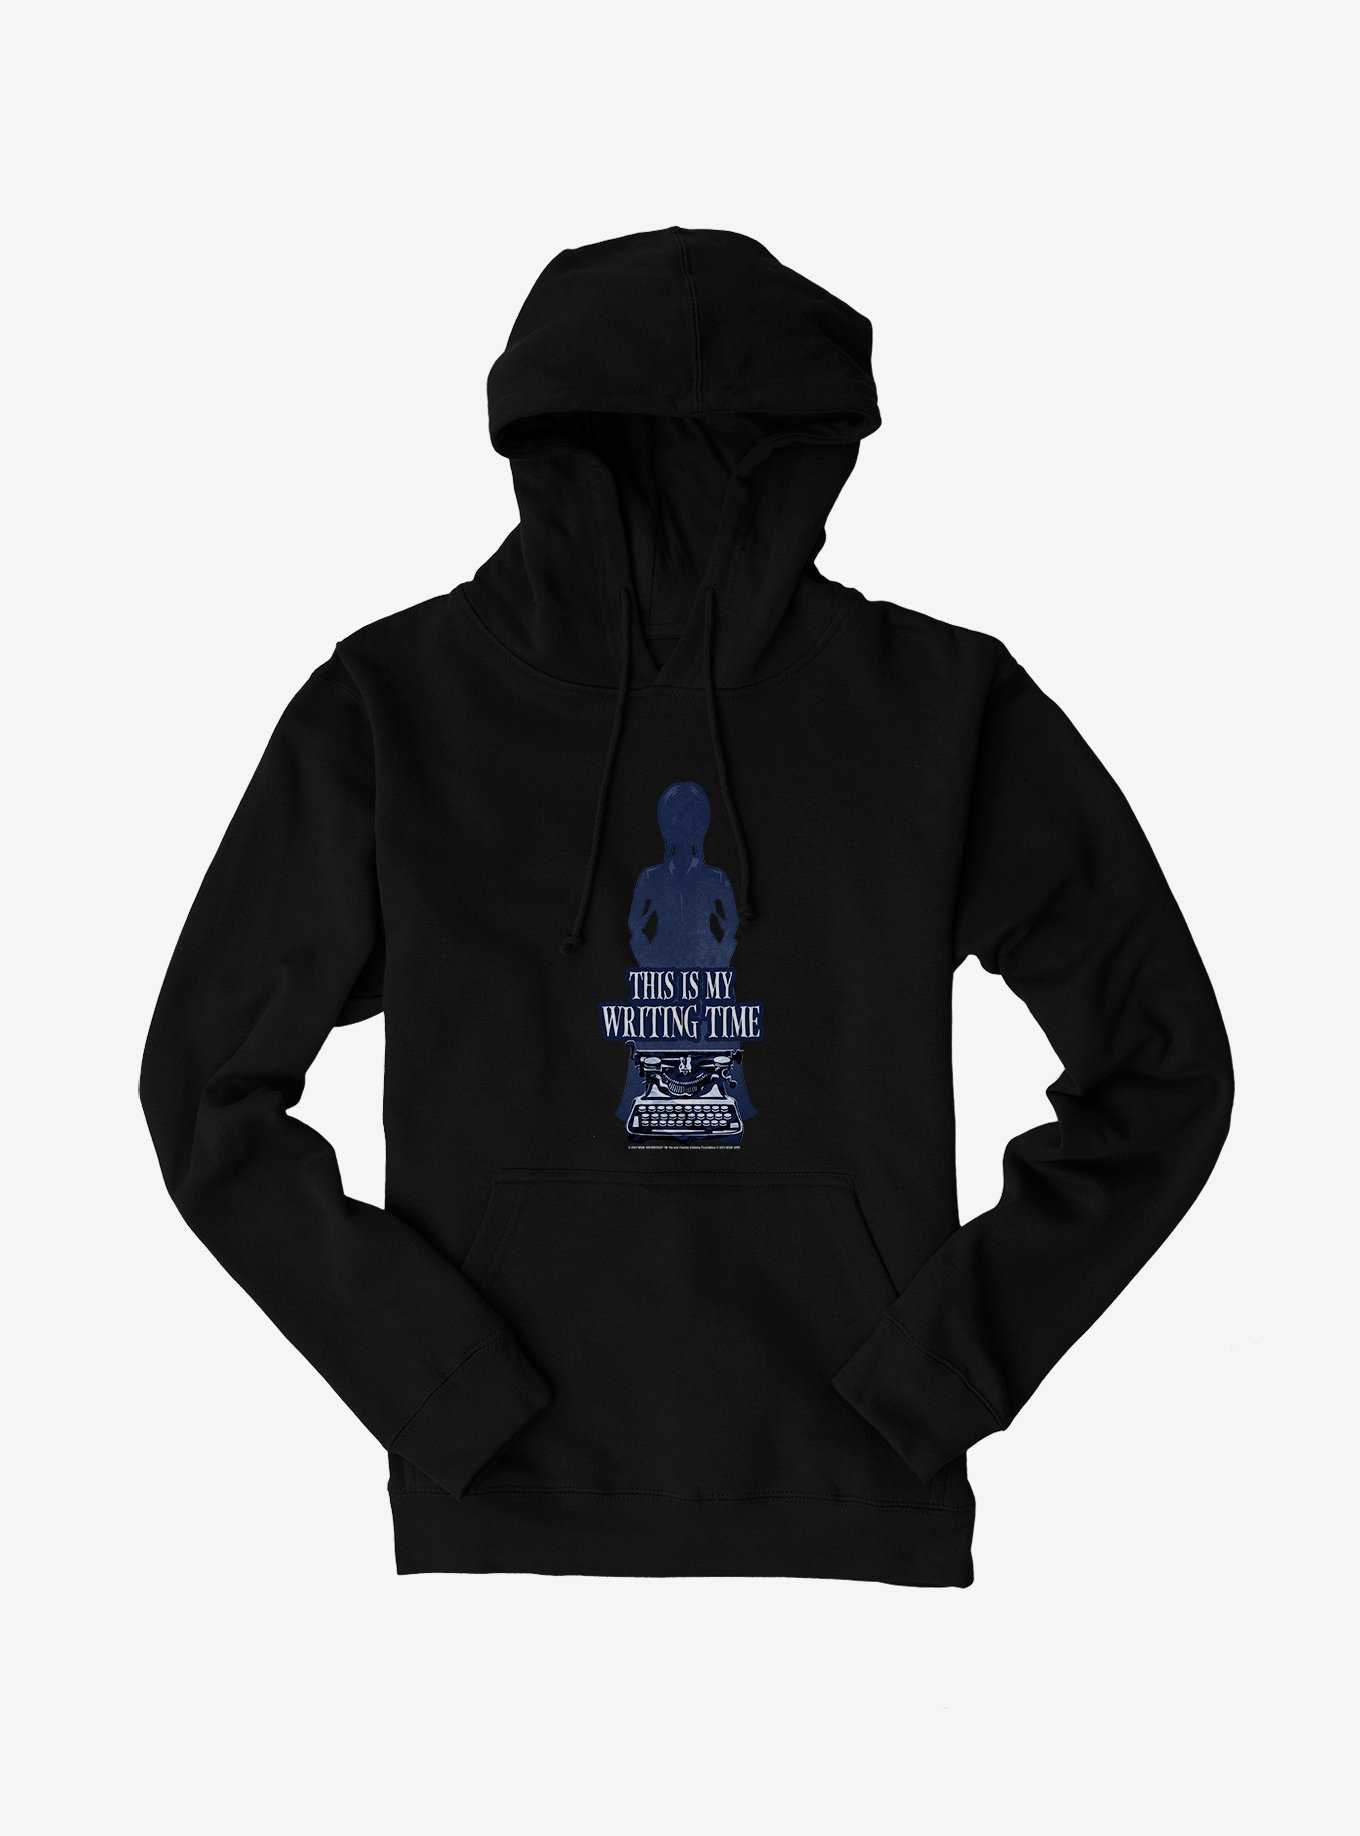 Wednesday My Writing Time Hoodie, , hi-res